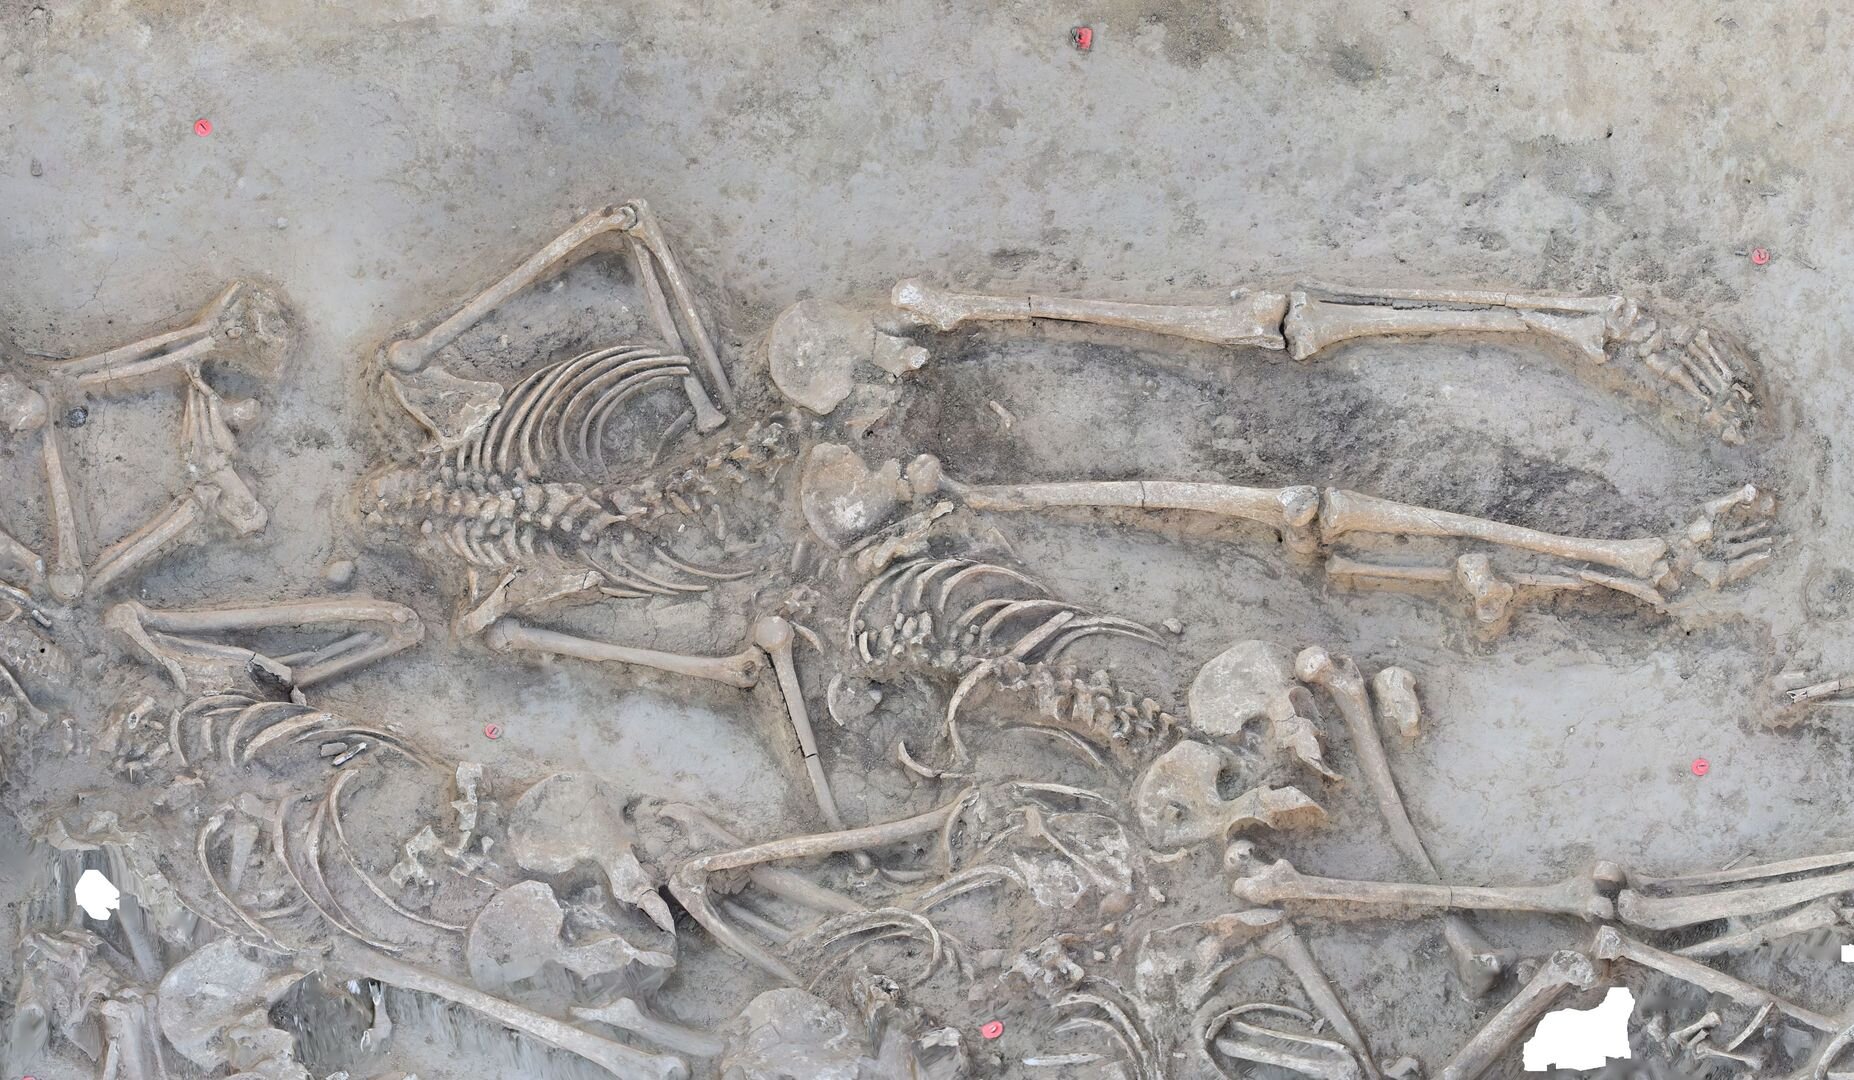 Headless skeletons in a settlement trench: A 7,000-year-old mass grave ...